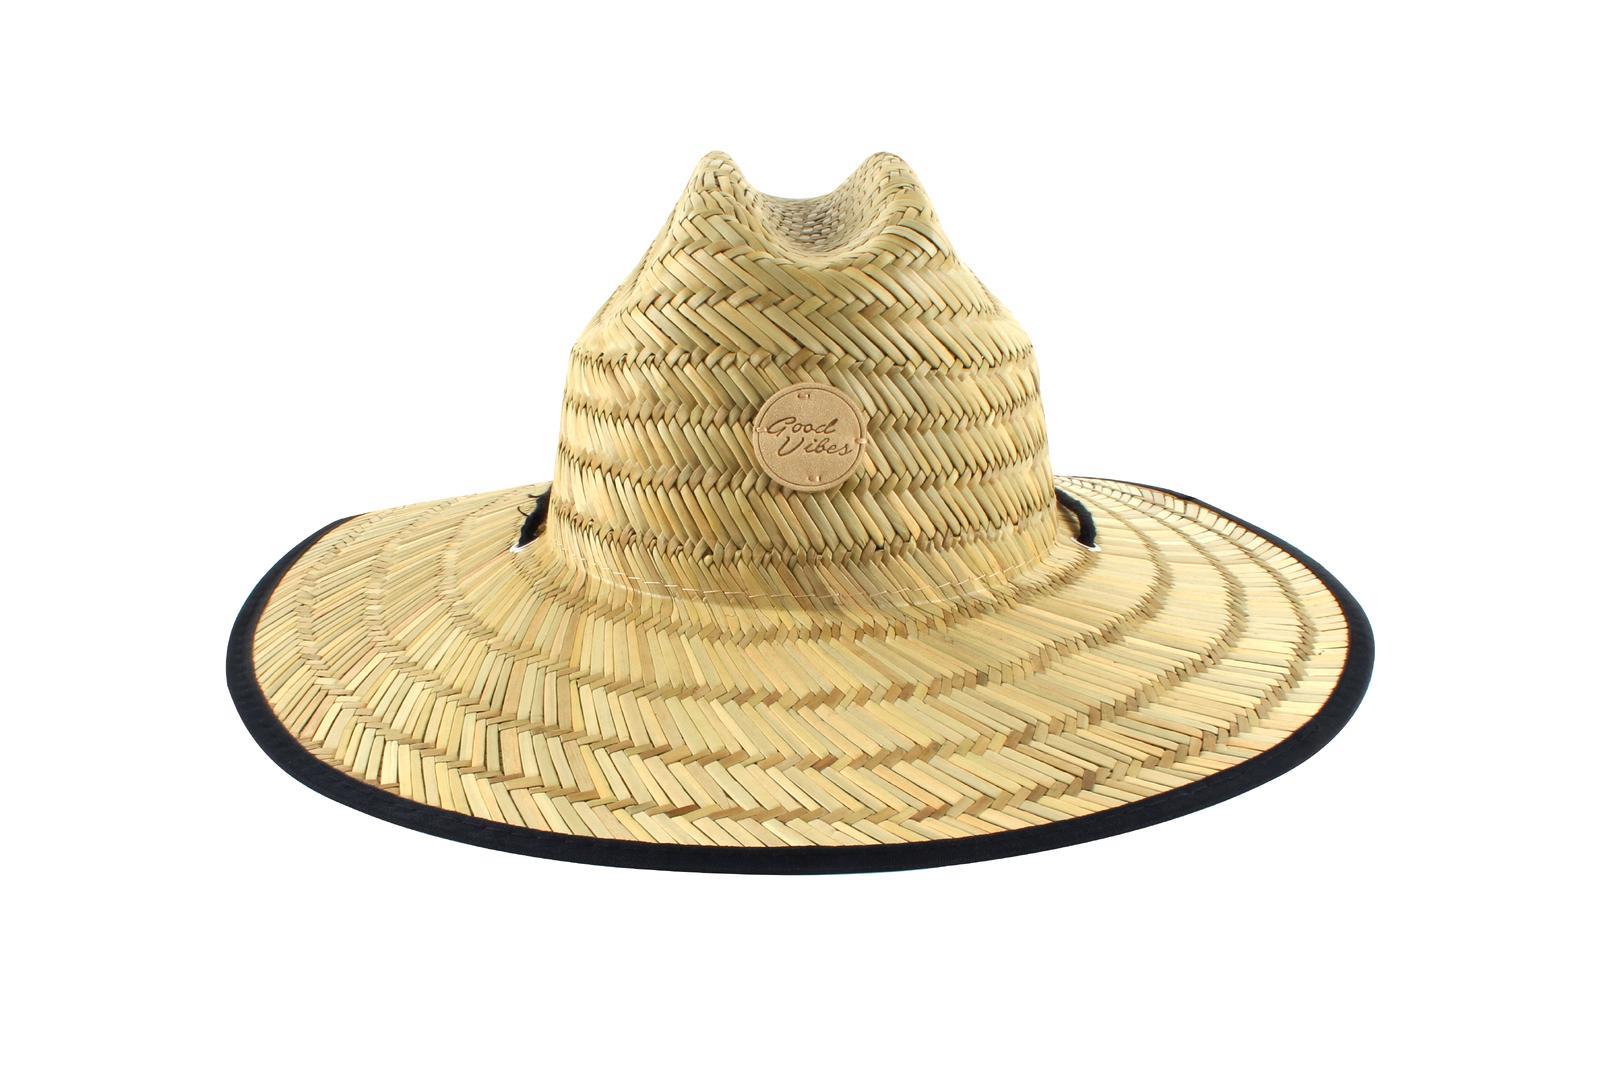 Good Vibes Surfer Beach Field Straw Leather Hat Summer Sun Protection Black